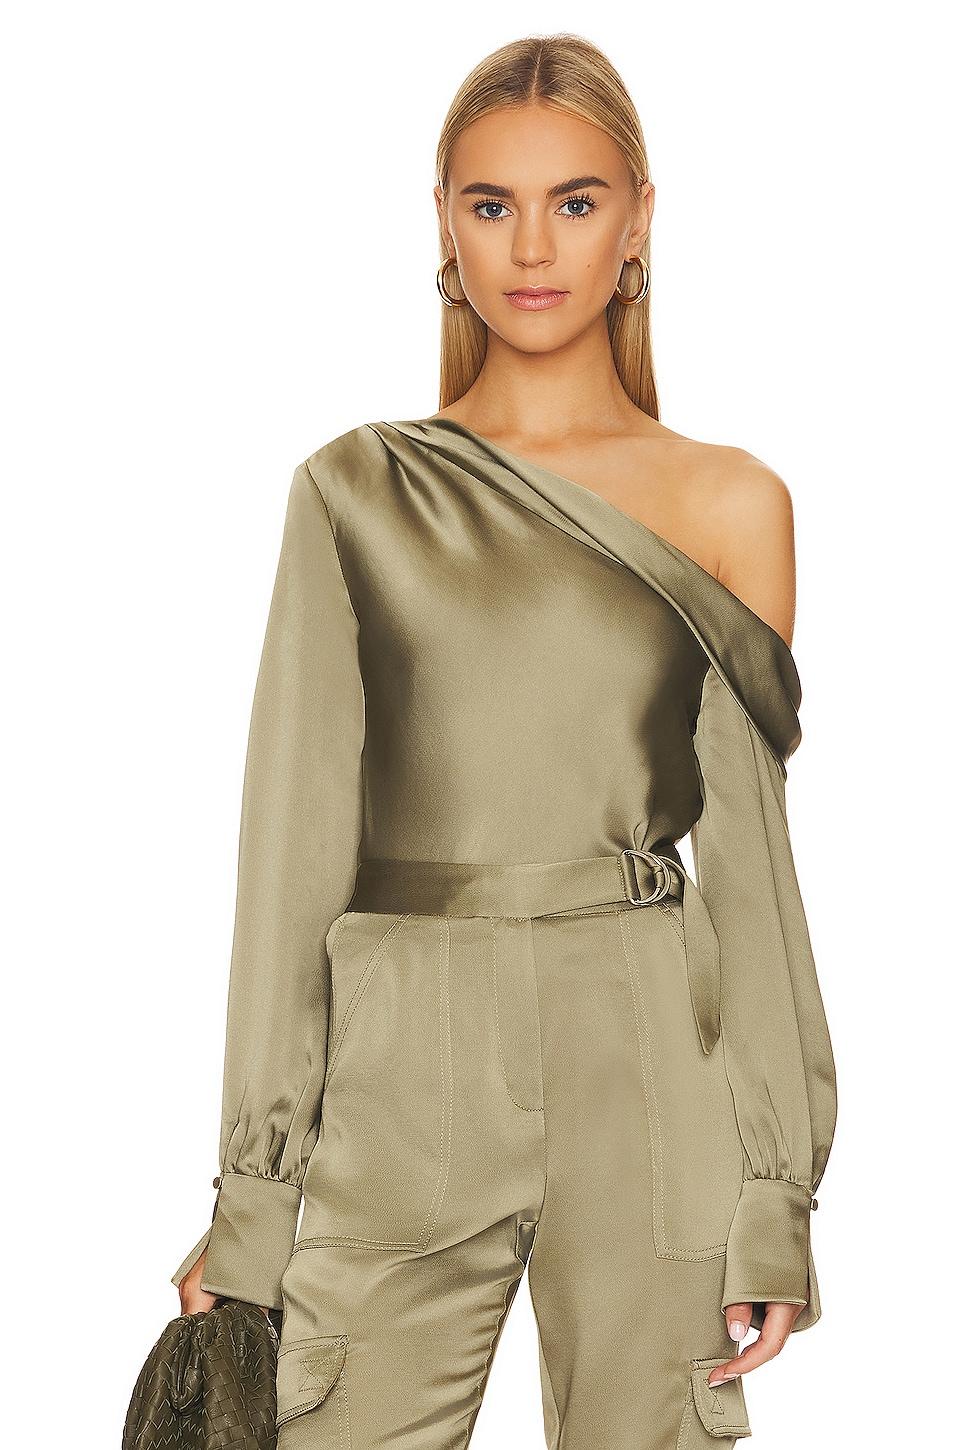 SIMKHAI Alice One Shoulder Top in Natural | Lyst